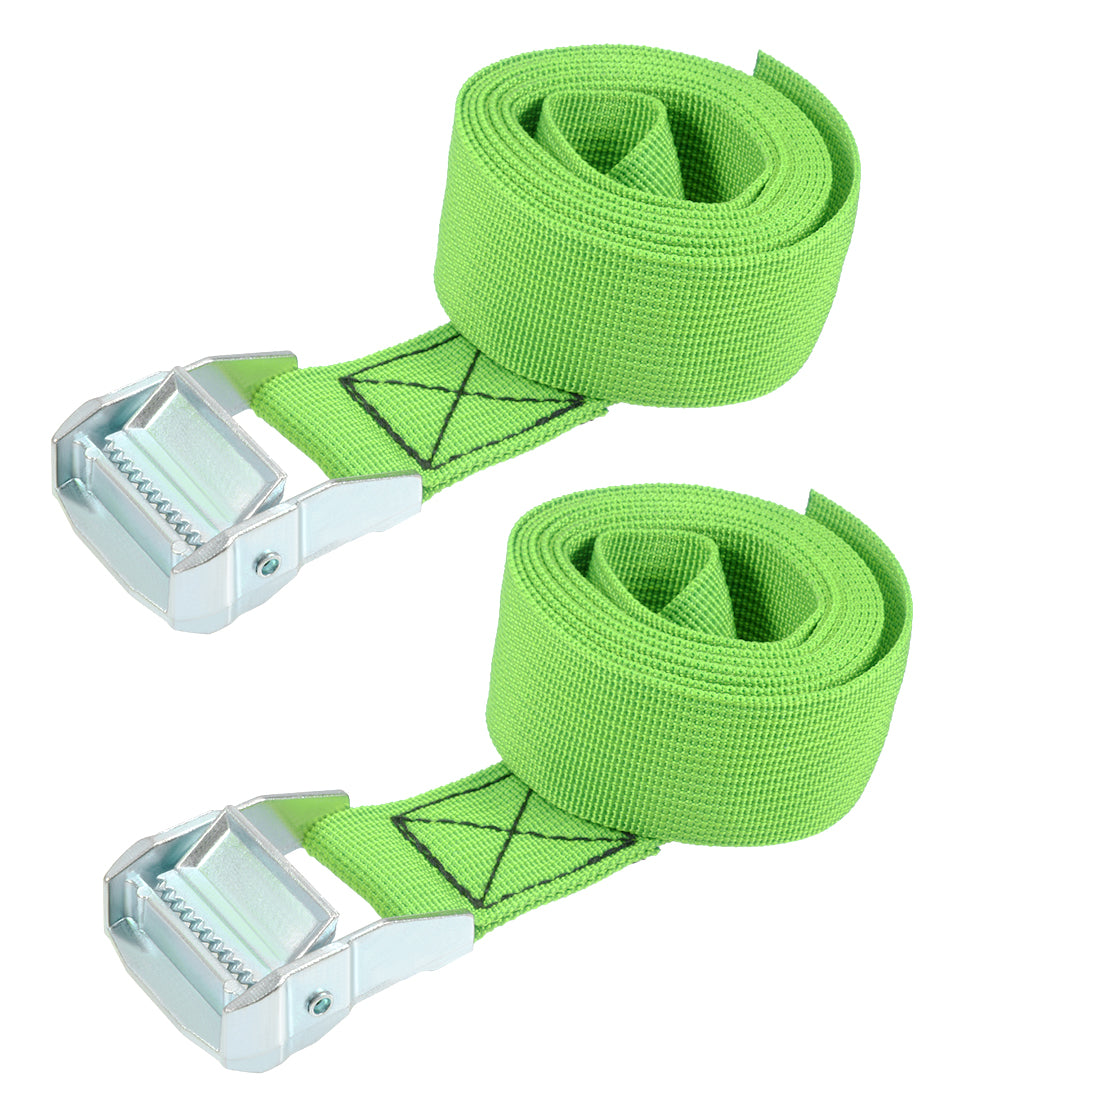 uxcell Uxcell 2Mx38mm Lashing Strap Cargo Tie Down Straps w Cam Lock Buckle 500Kg Work Load, Green, 2Pcs